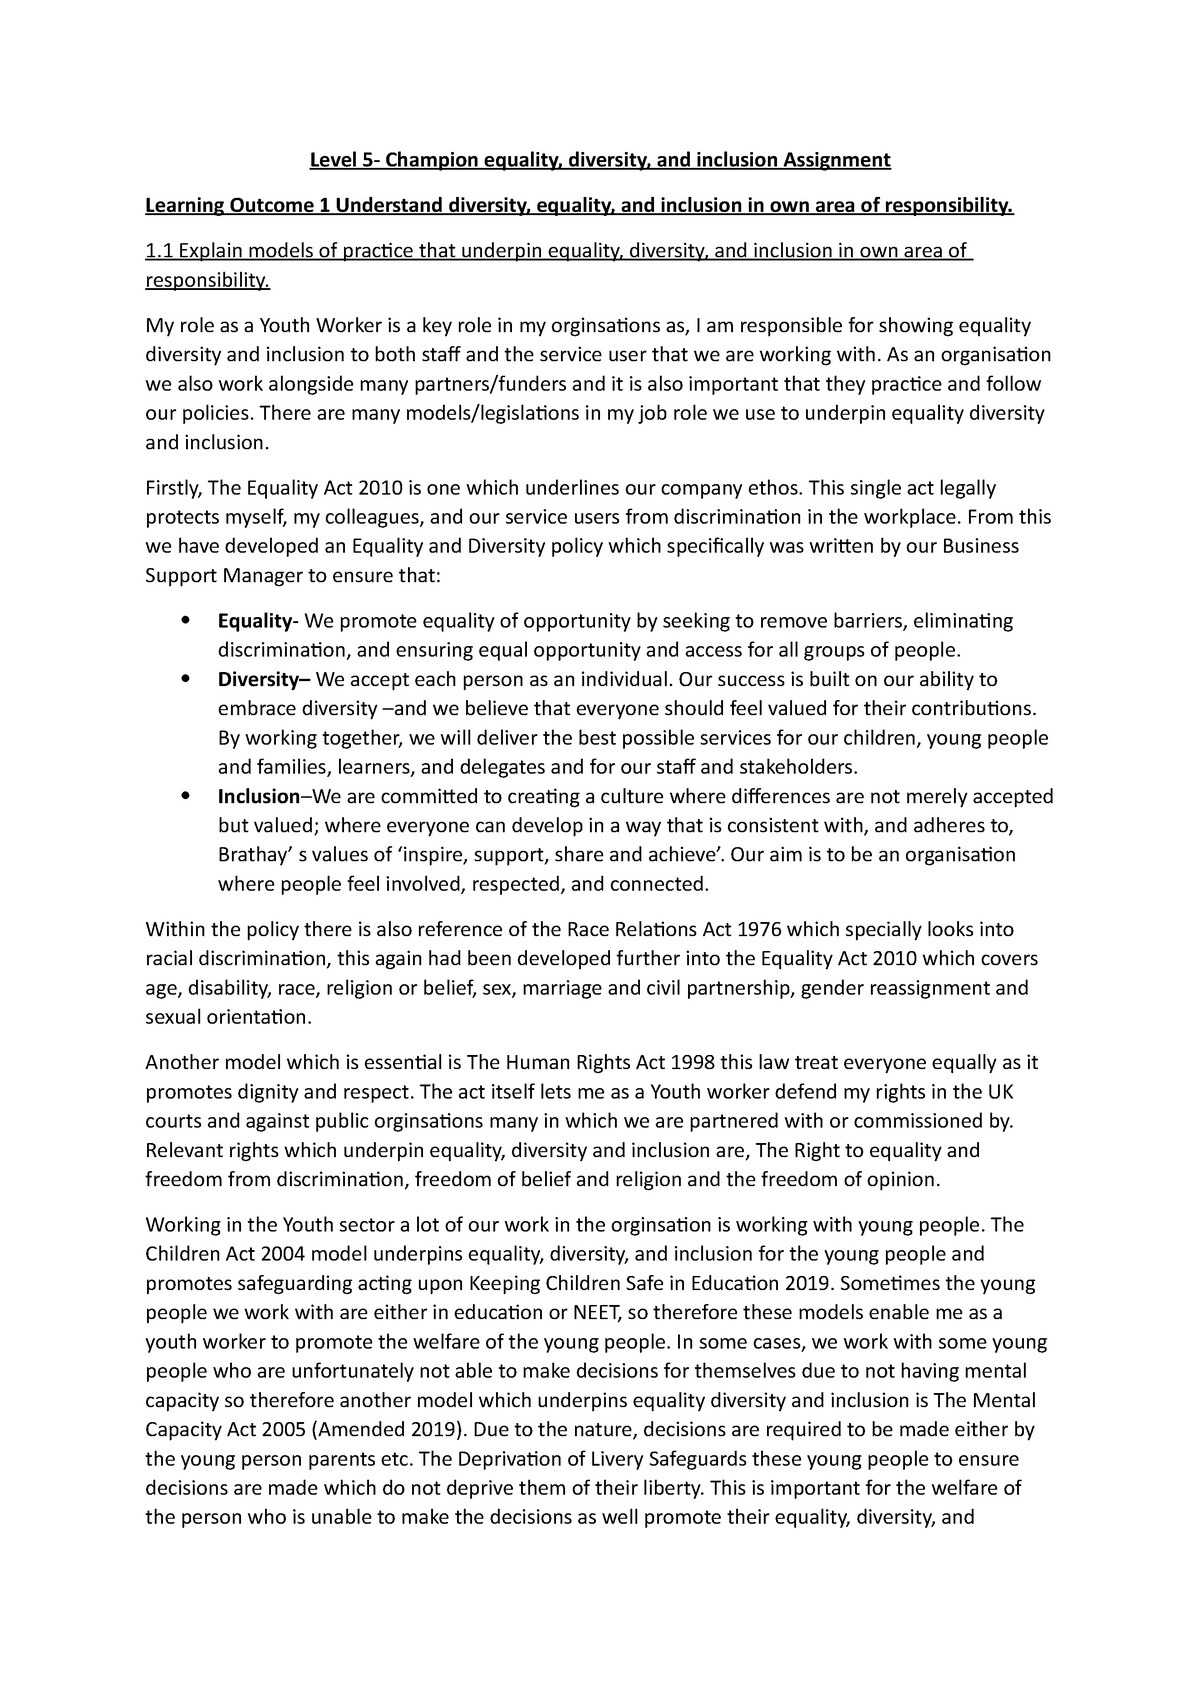 diversity equity and inclusion college essay